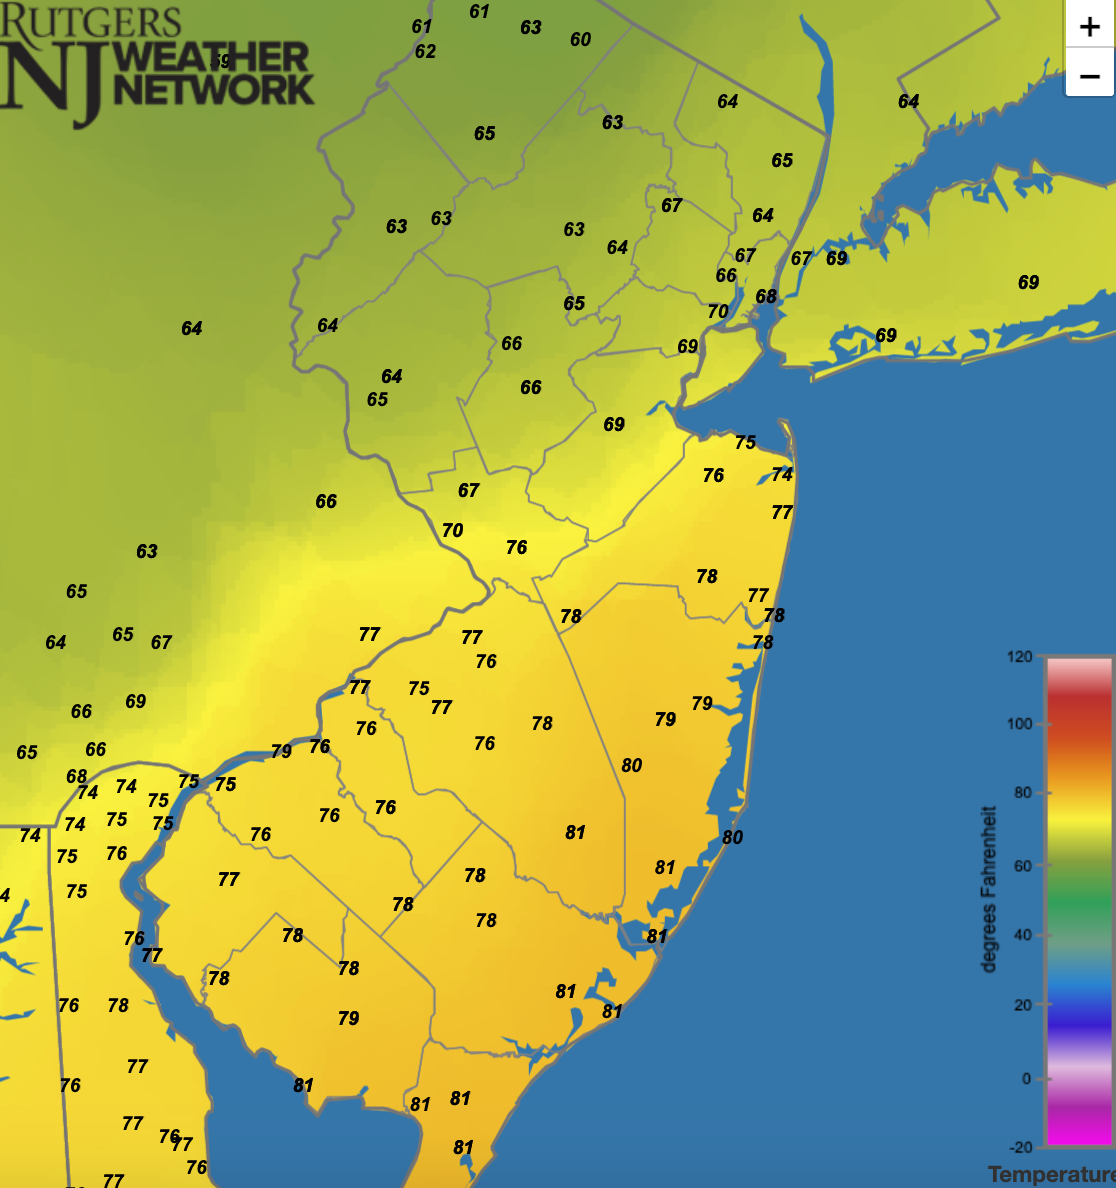 Surface air temperatures at 8:10 PM EDT on September 1st as the low was located directly in the center of the state and the heaviest rains were falling just to the north of the warm front in Somerset County (source: Rutgers NJ Weather Network).